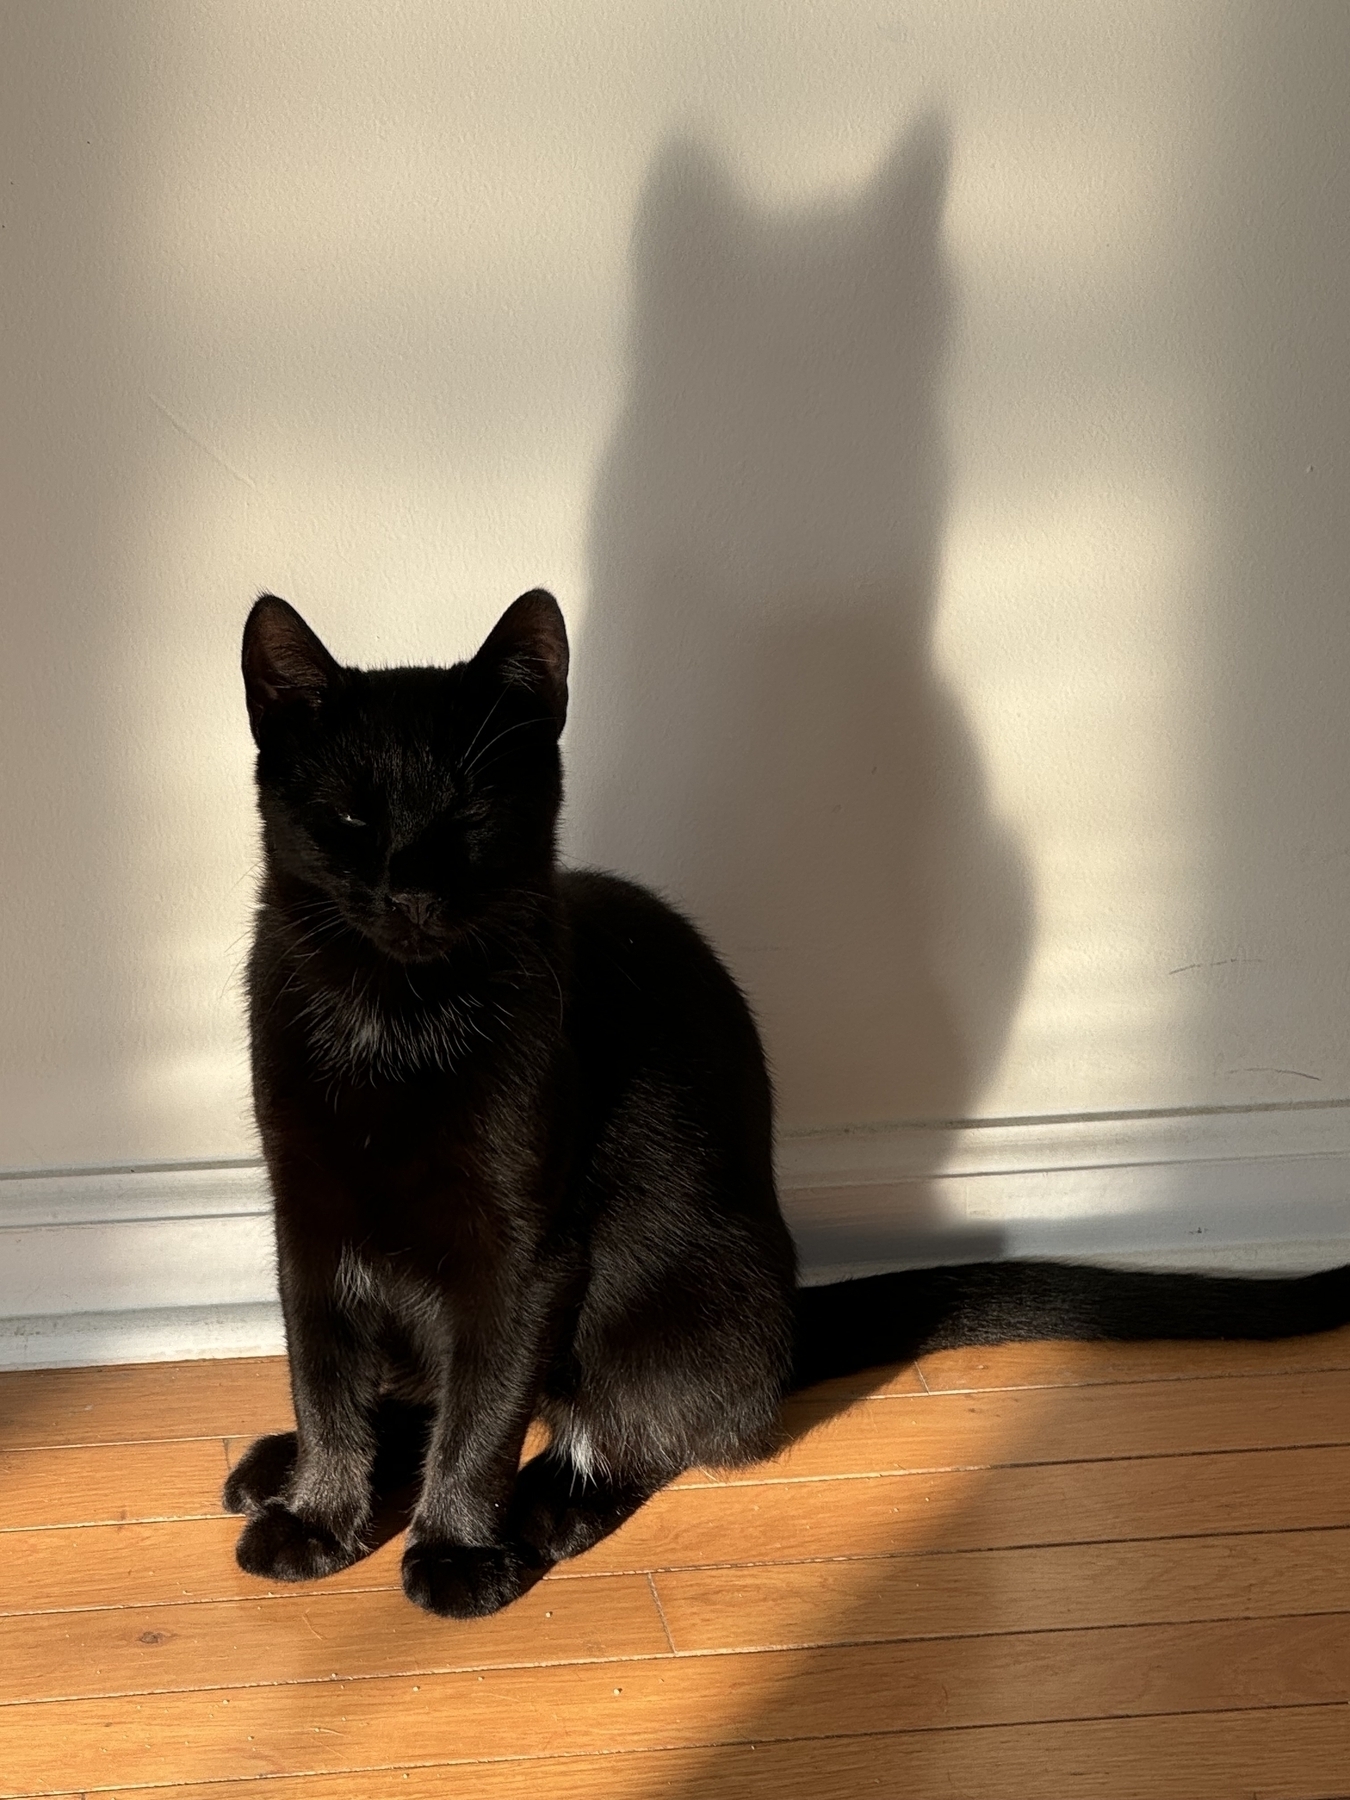 The shadow of a cat